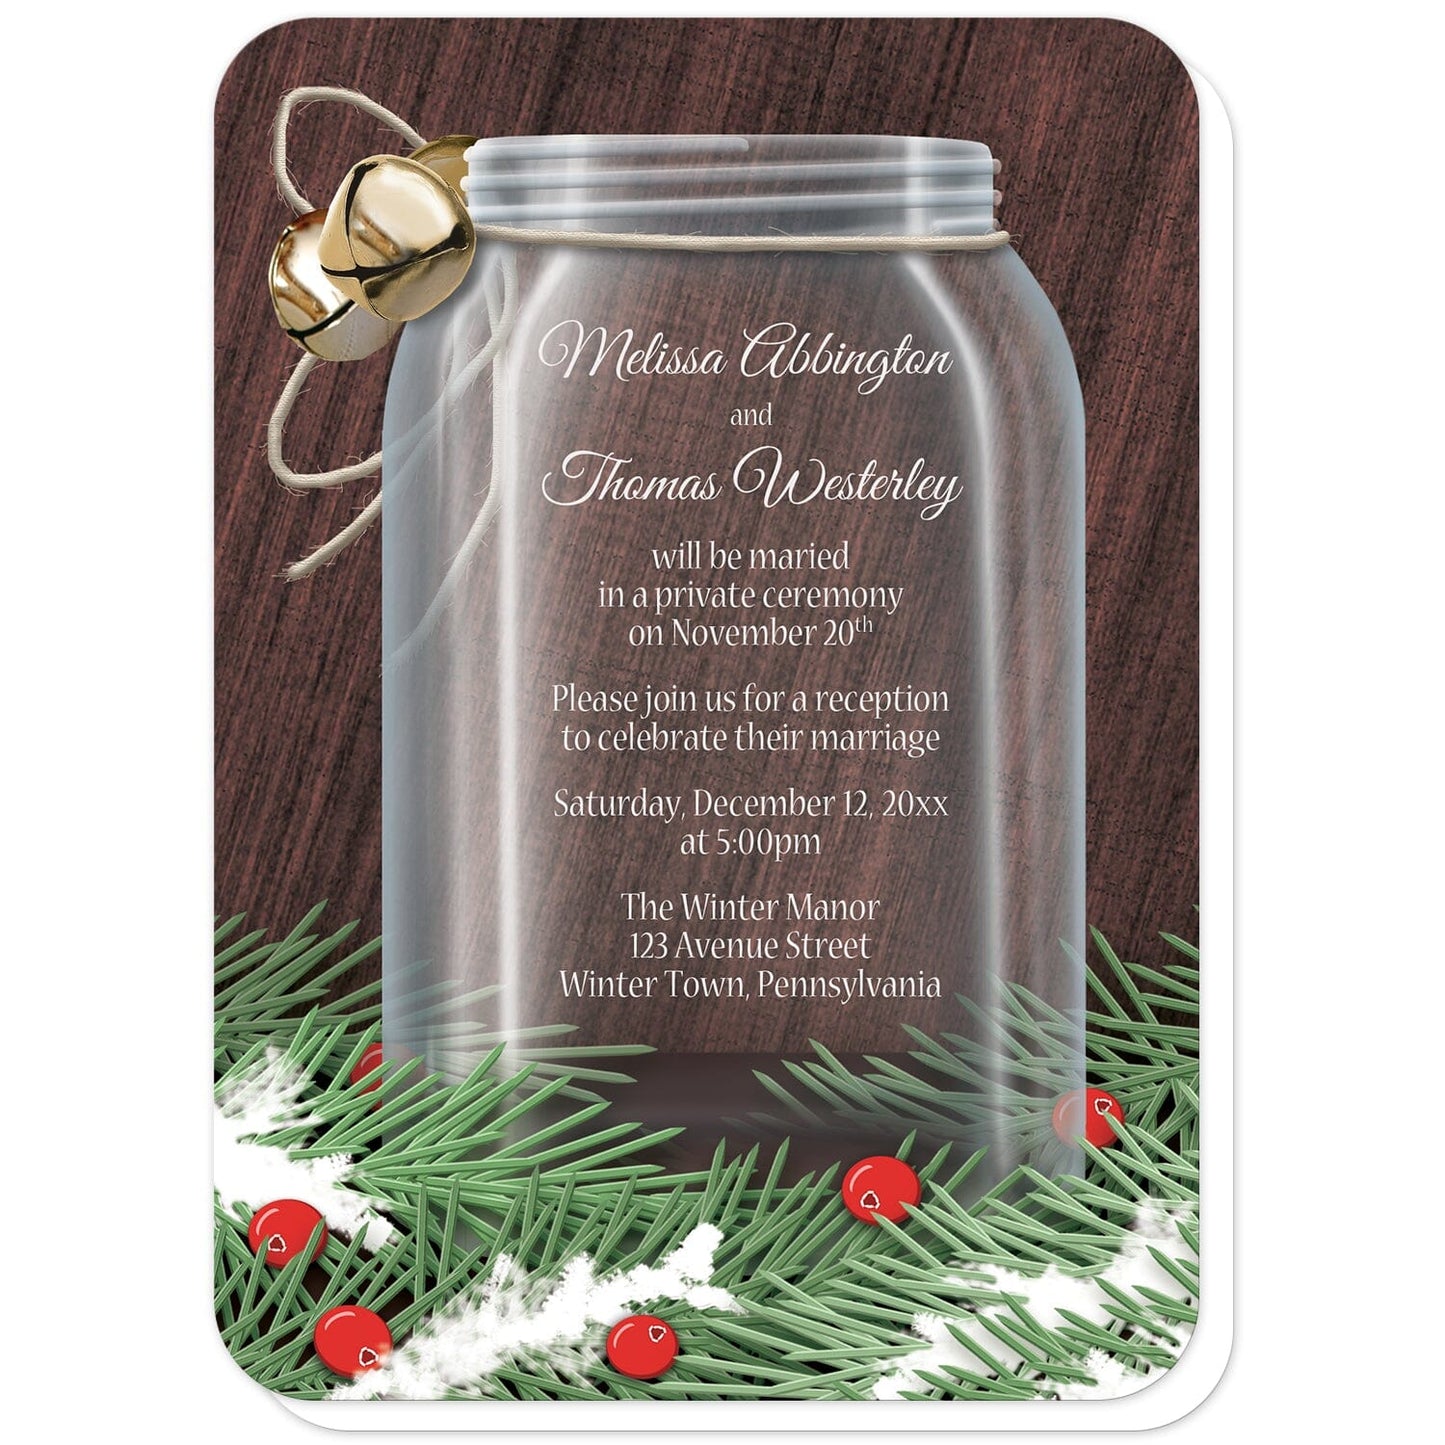 Winter Mason Jar Pine Boughs Reception Only Invitations (with rounded corners) at Artistically Invited. Rustic holiday-themed winter mason jar pine boughs reception only invitations designed with a glass mason jar illustration with twine and jingle bells tied around the top of the jar and pine boughs and cranberries along the bottom over a dark wood design. Your personalized post-wedding reception details are custom printed in white over the mason jar area of the design.